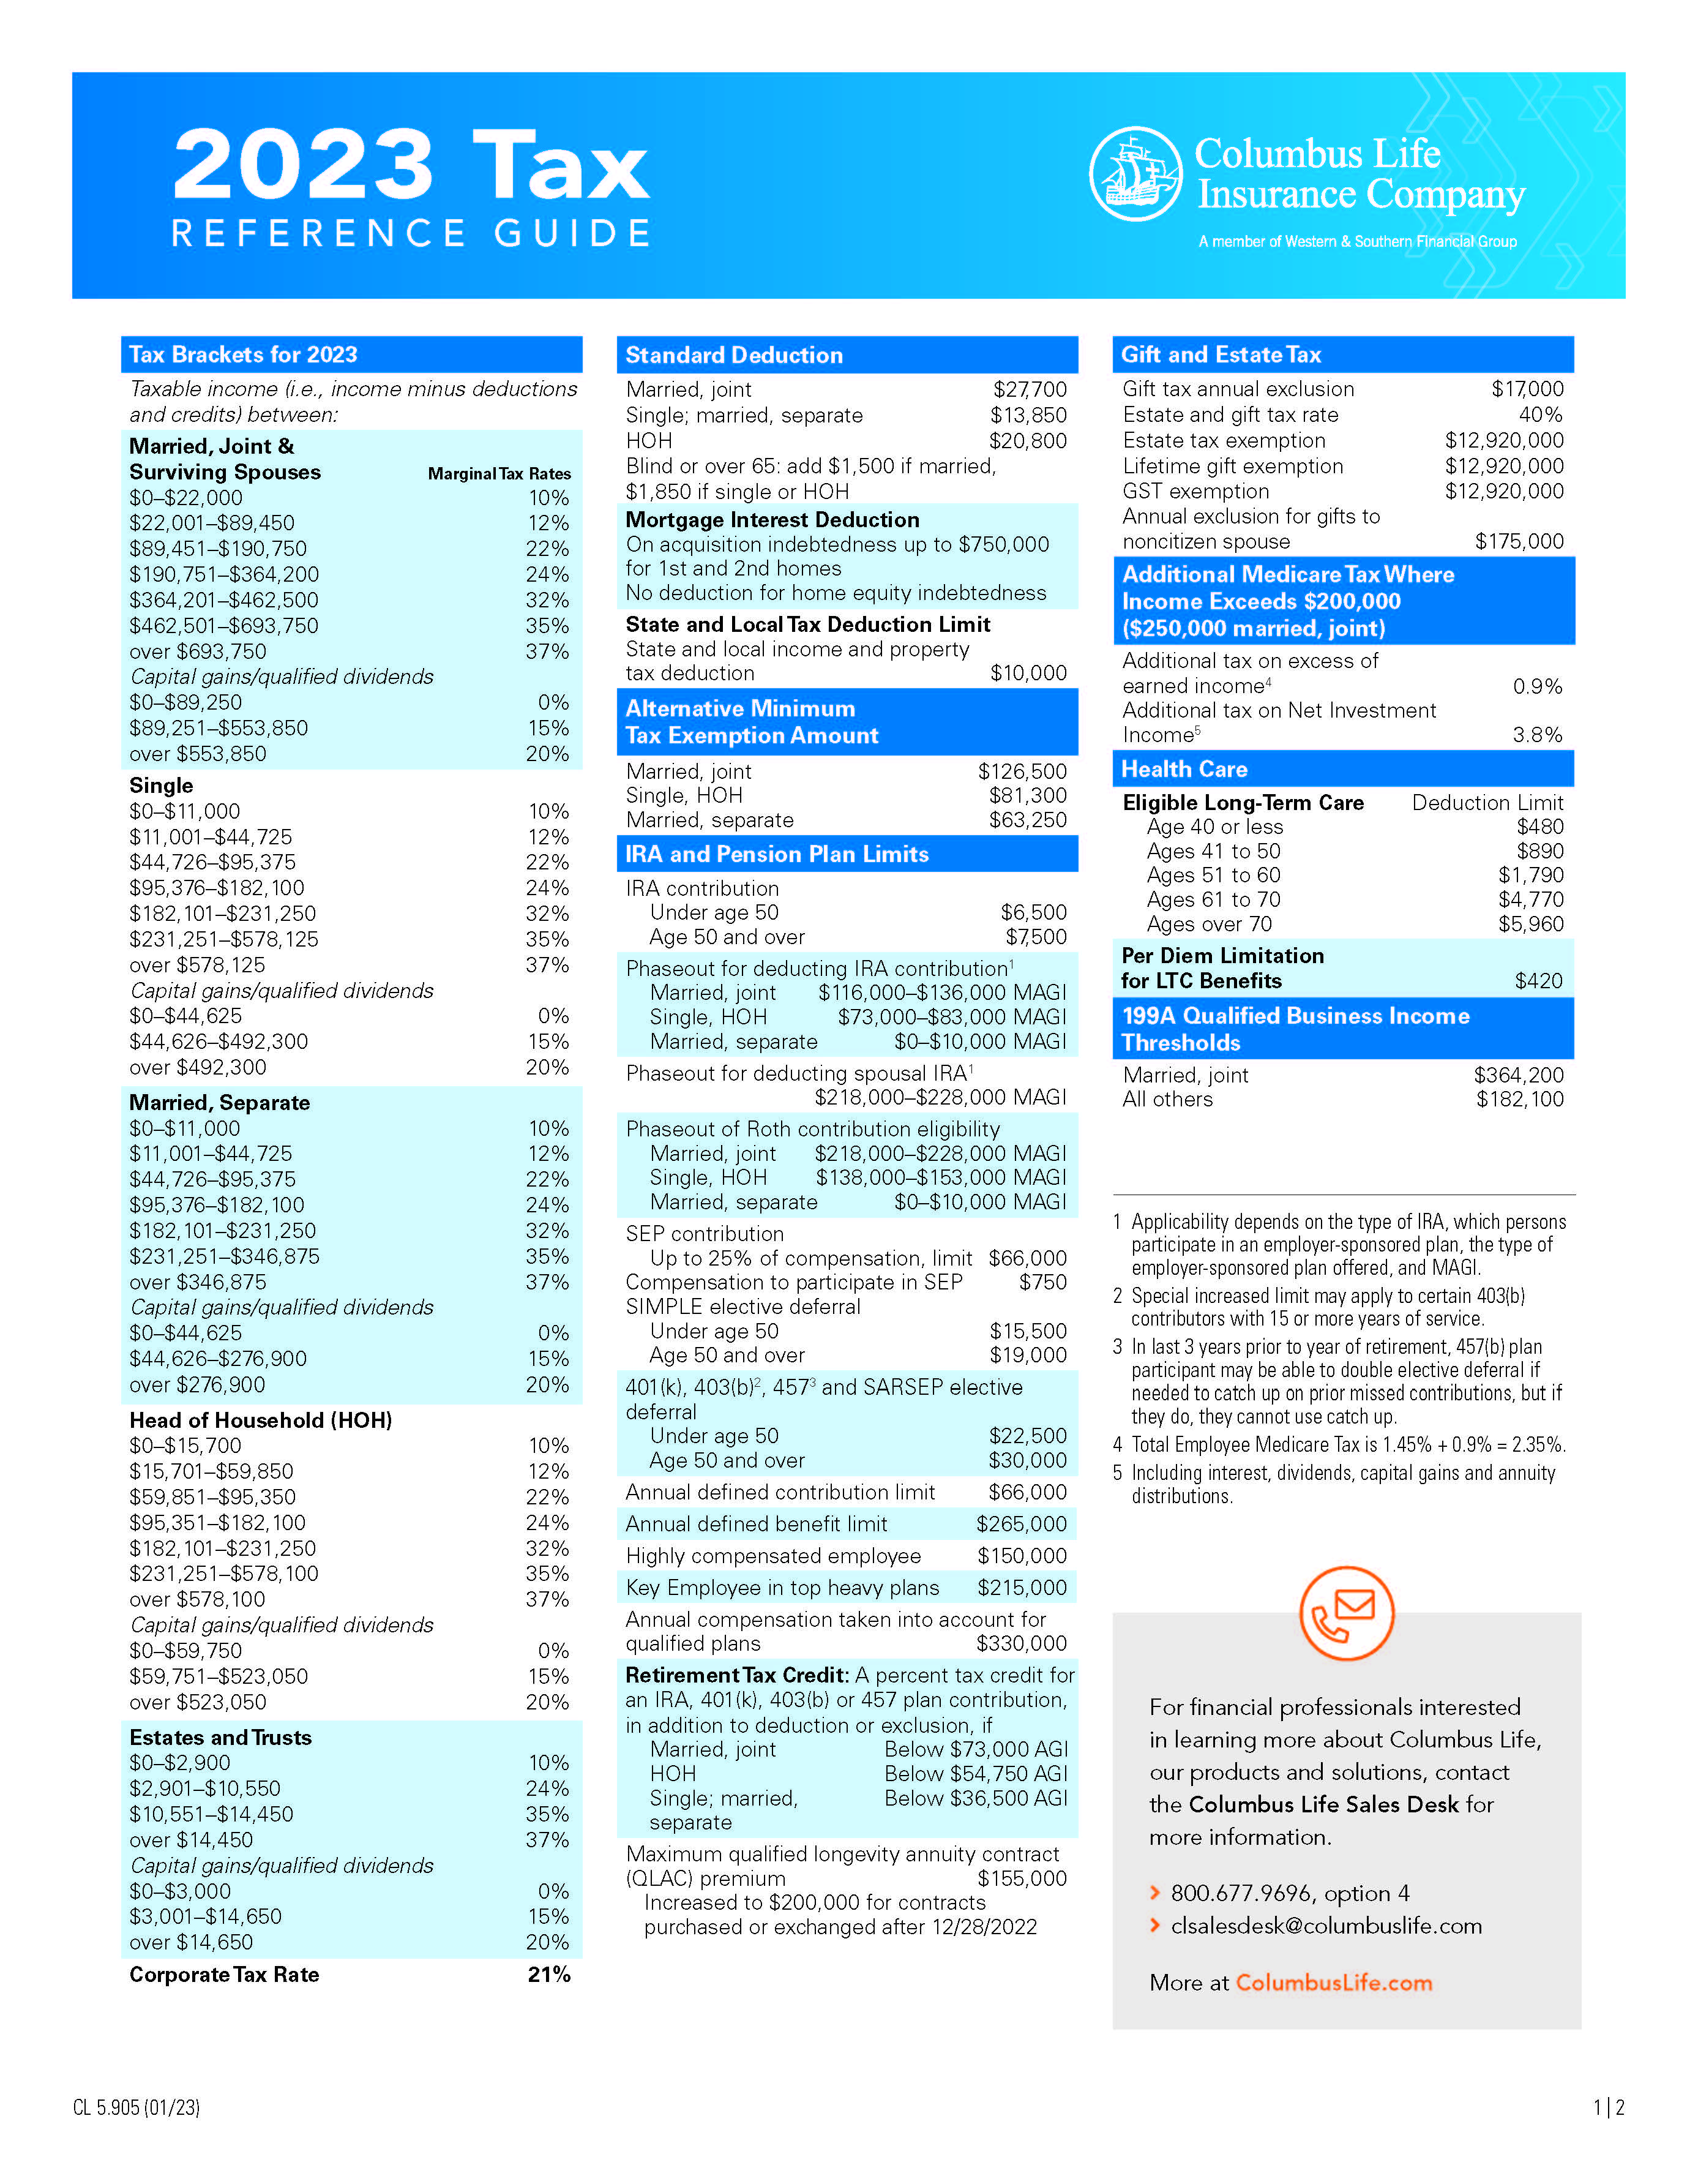 tax-reference-sheet-2023_Page_1.jpg